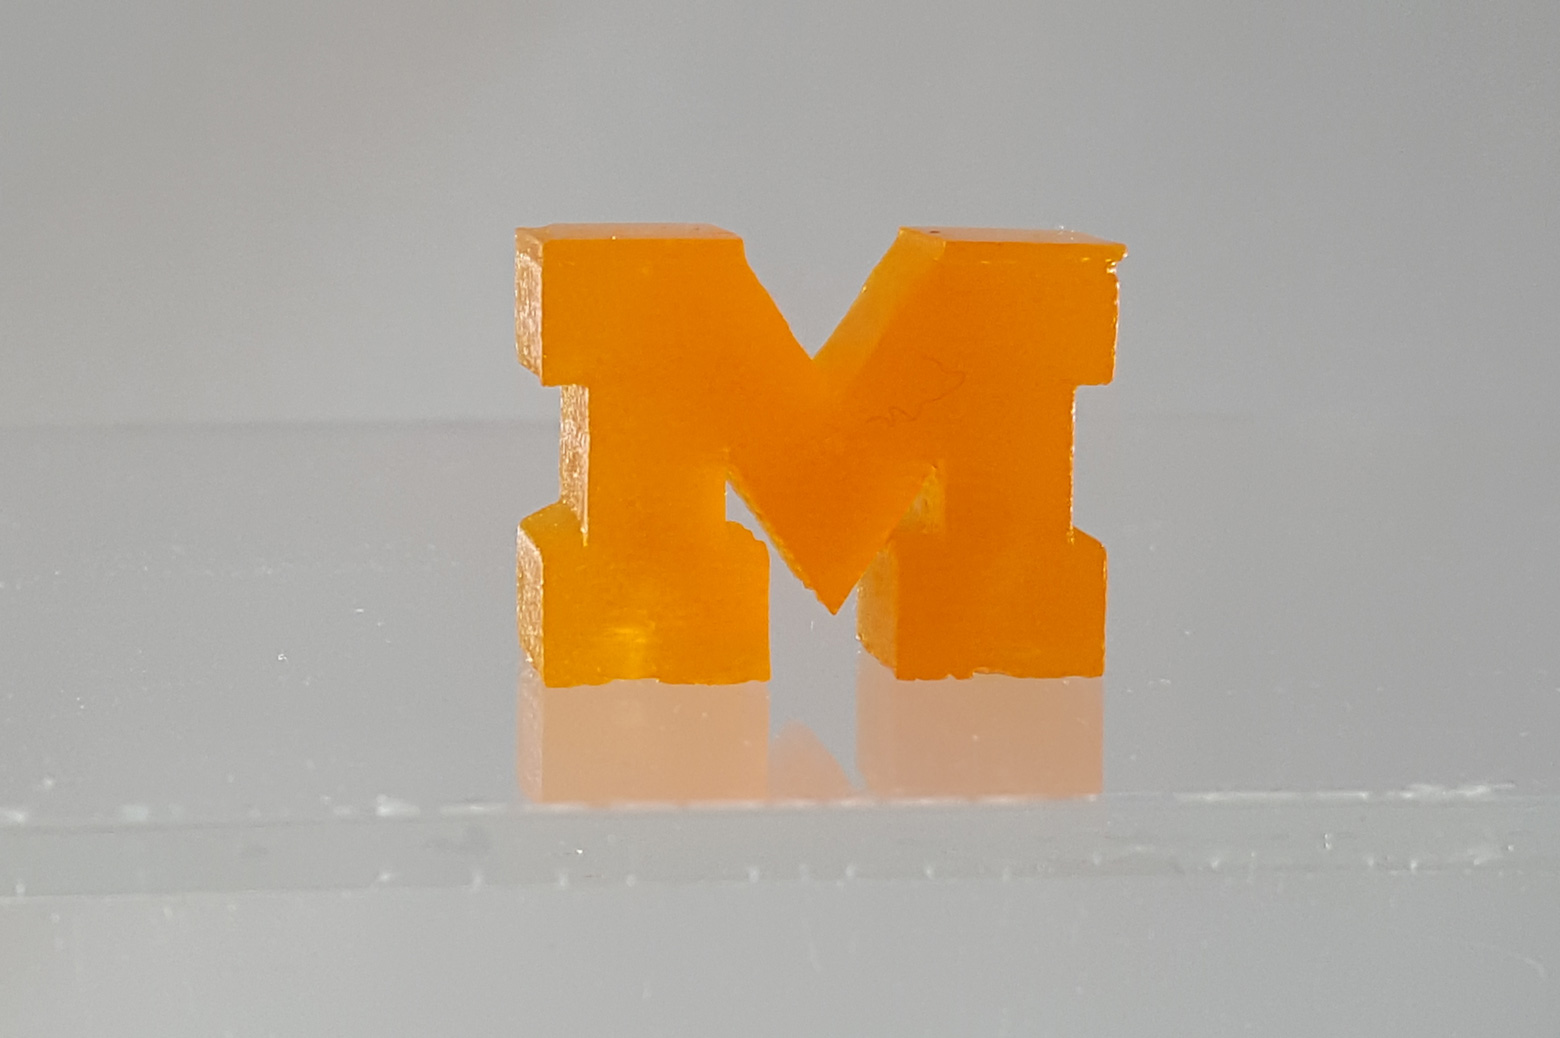 A resin sample created by the new 3D printer